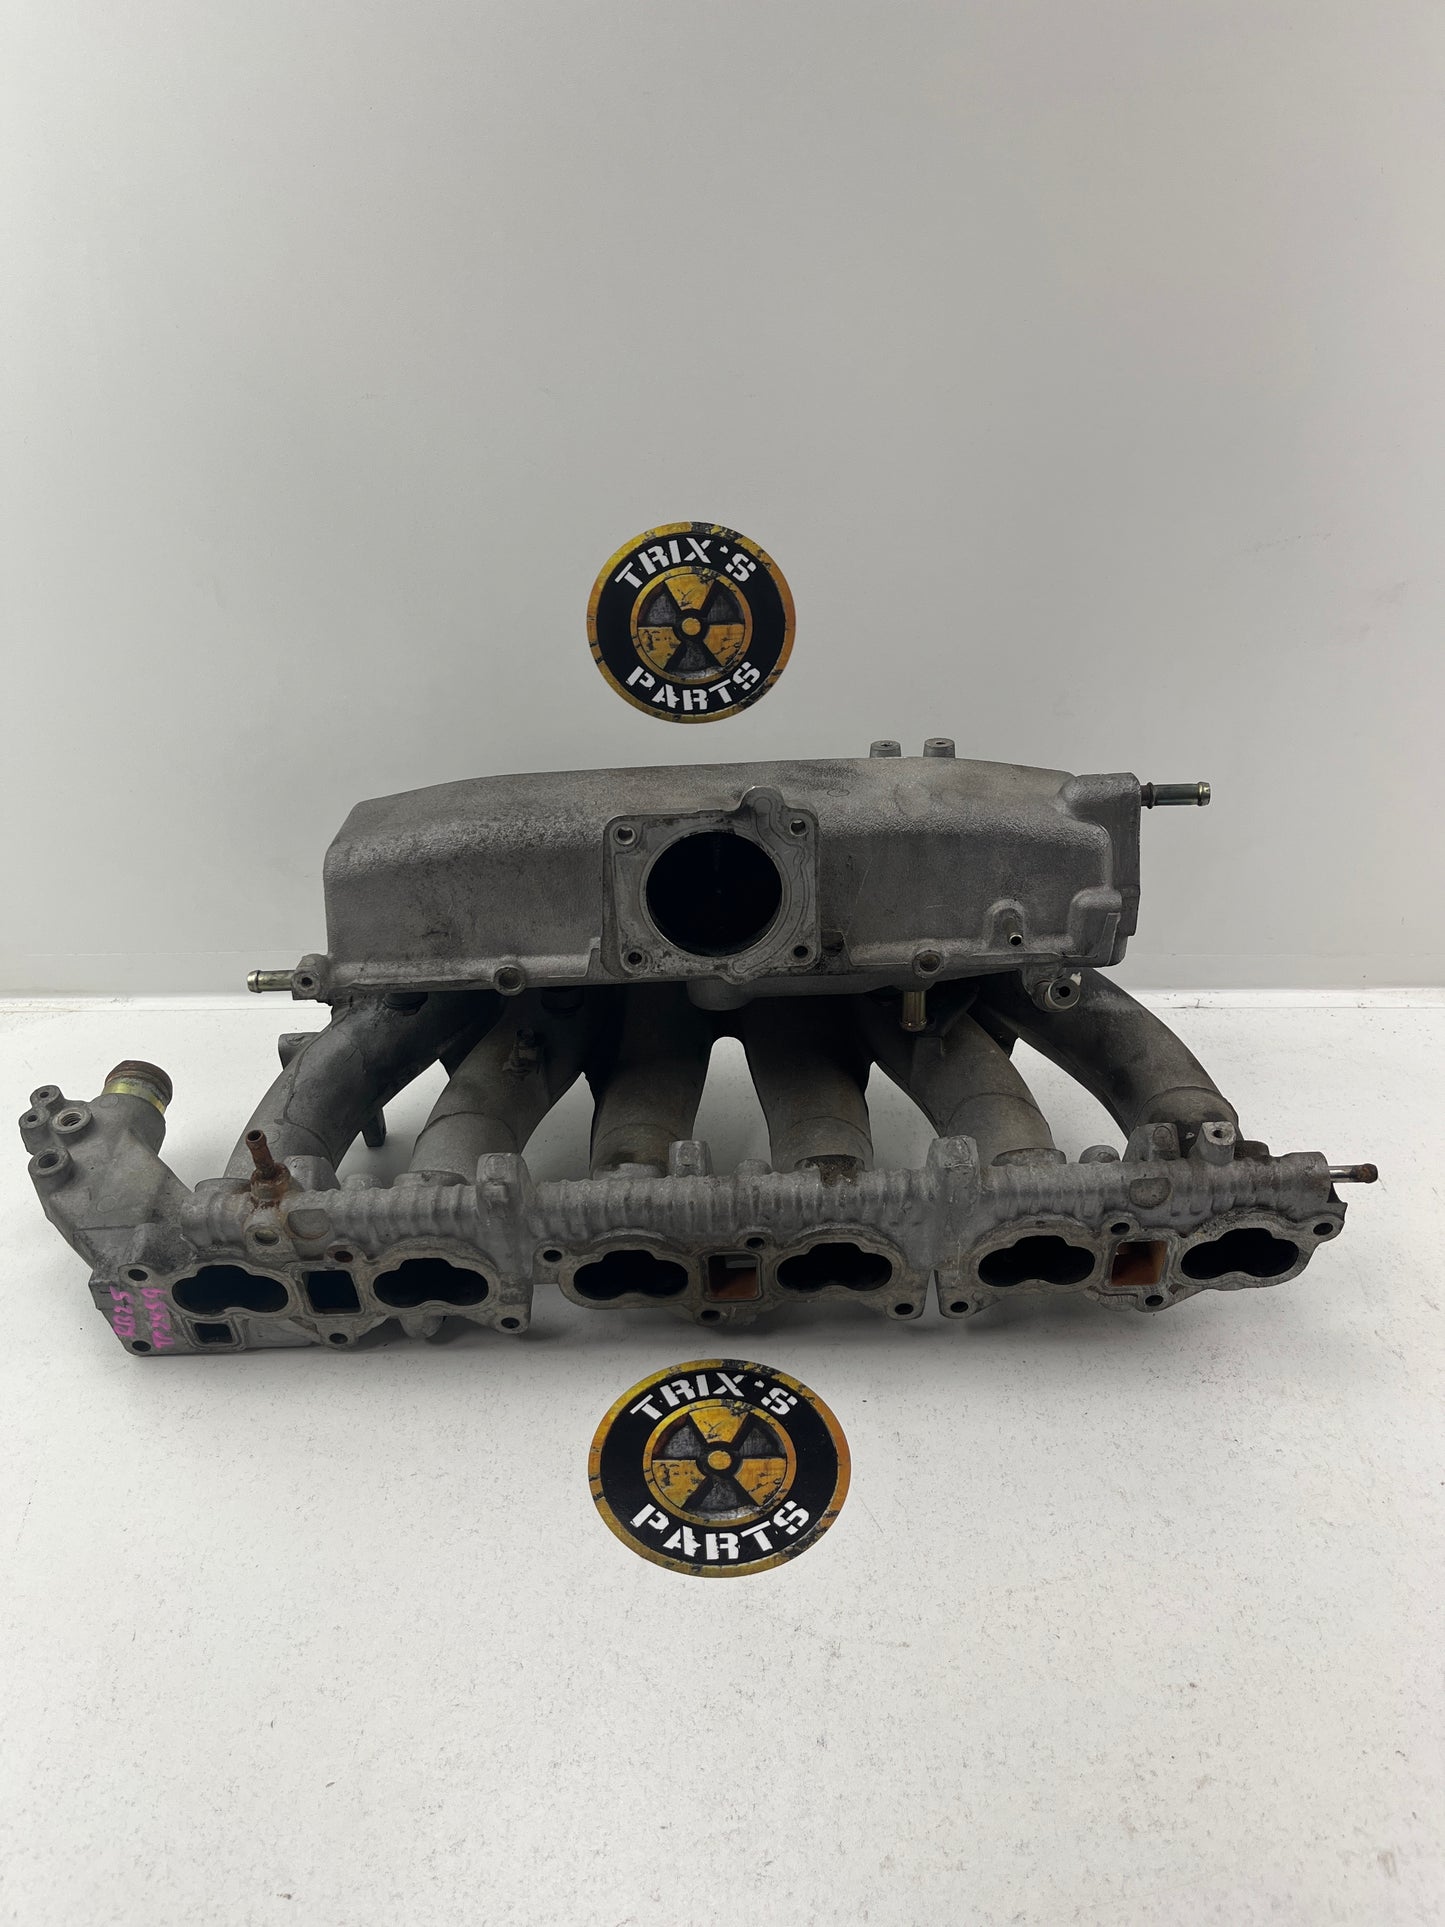 Used Complete Bare Intake Manifold to Suit RB25DET and RB25DE Engines